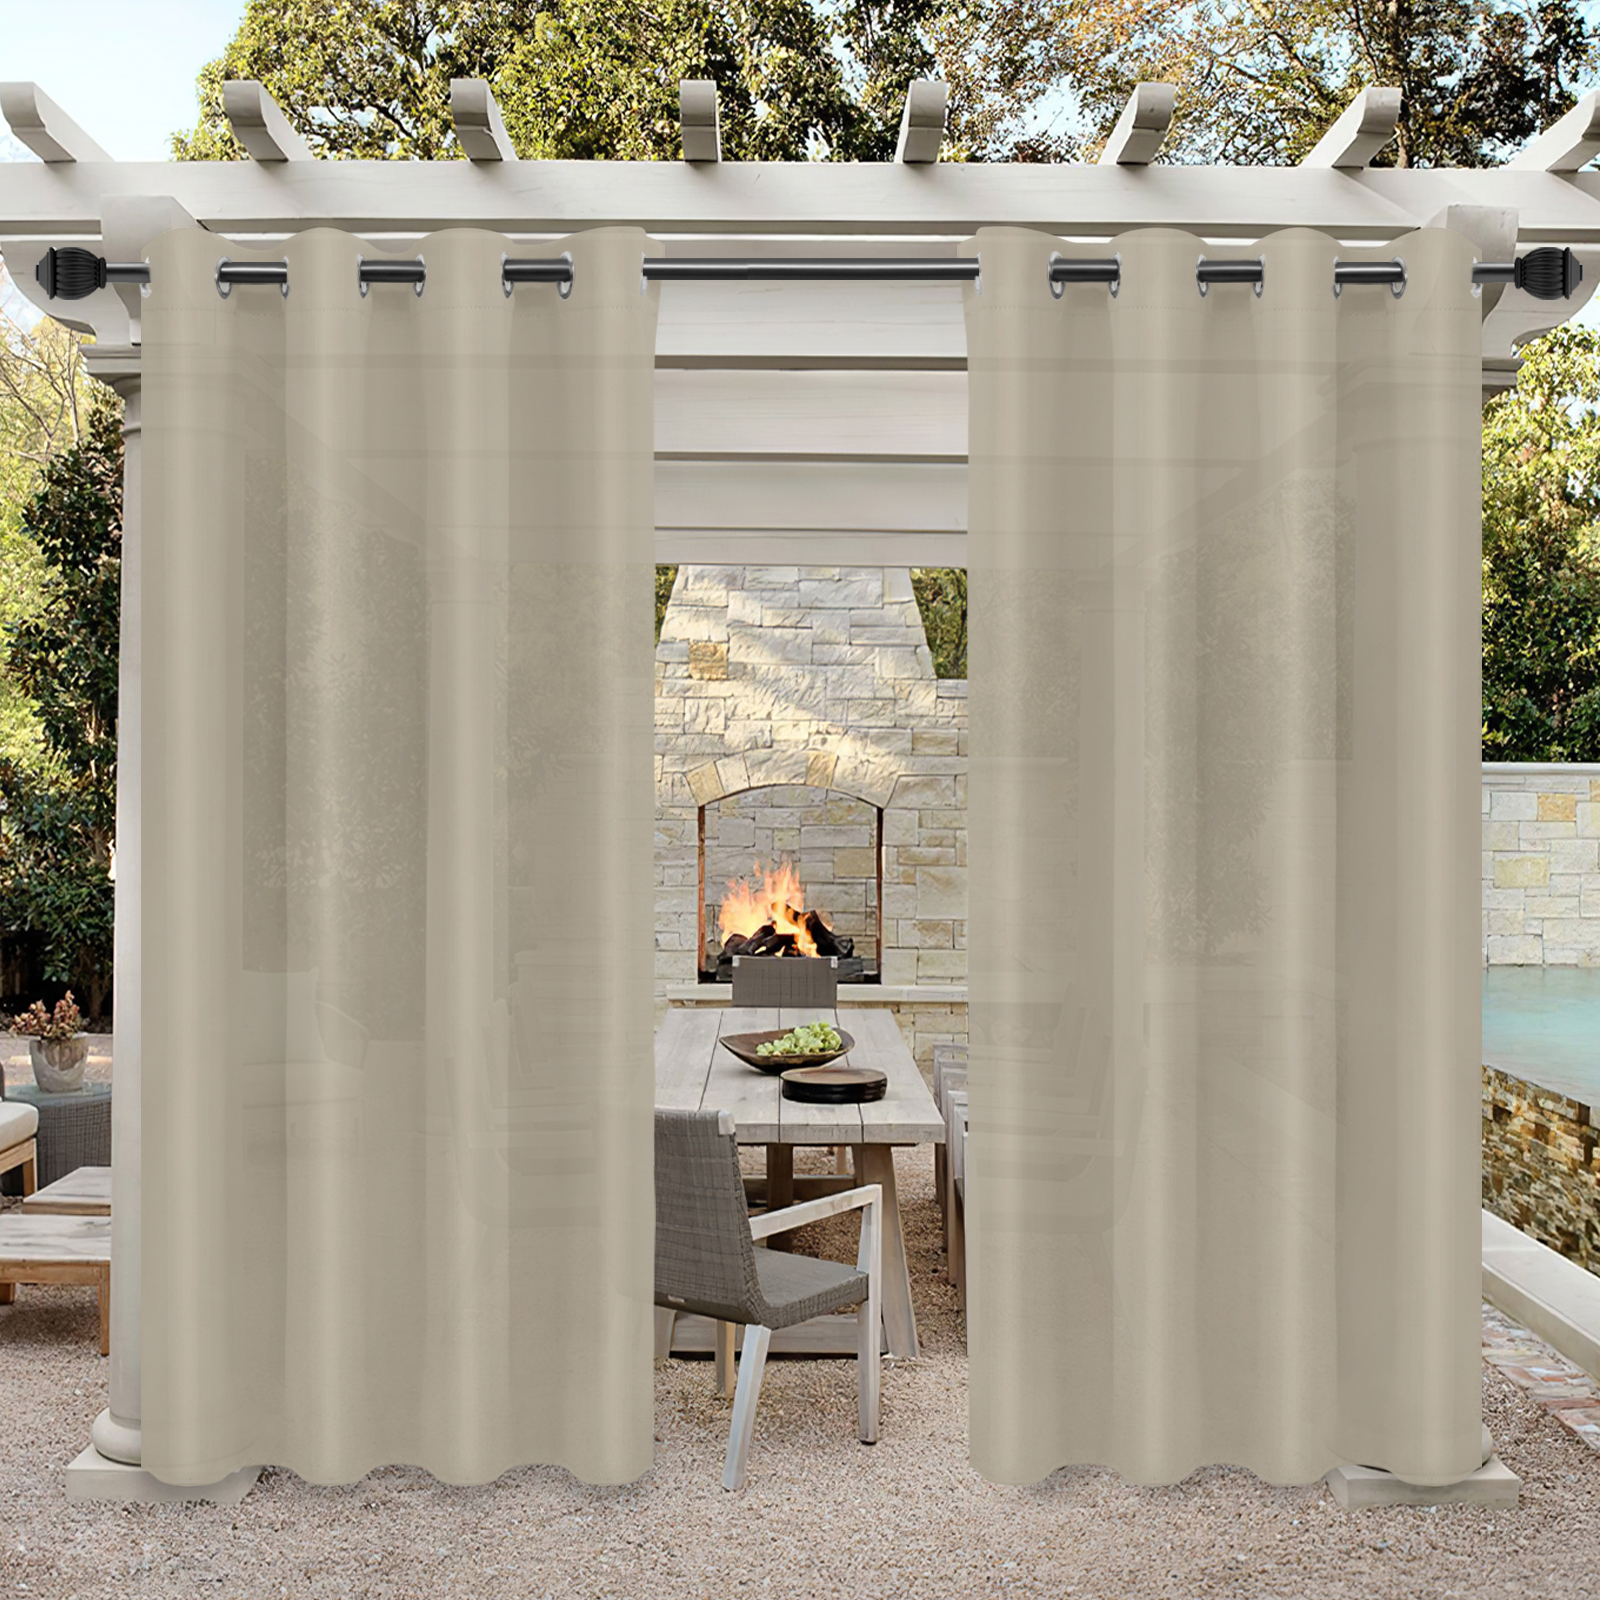 2 Panels Easy-Going Outdoor Curtains for Patio Waterproof Cabana Grommet Curtain Panels, Beige, 52 x 84 inch, Set of 2 - Walmart.com $16.99